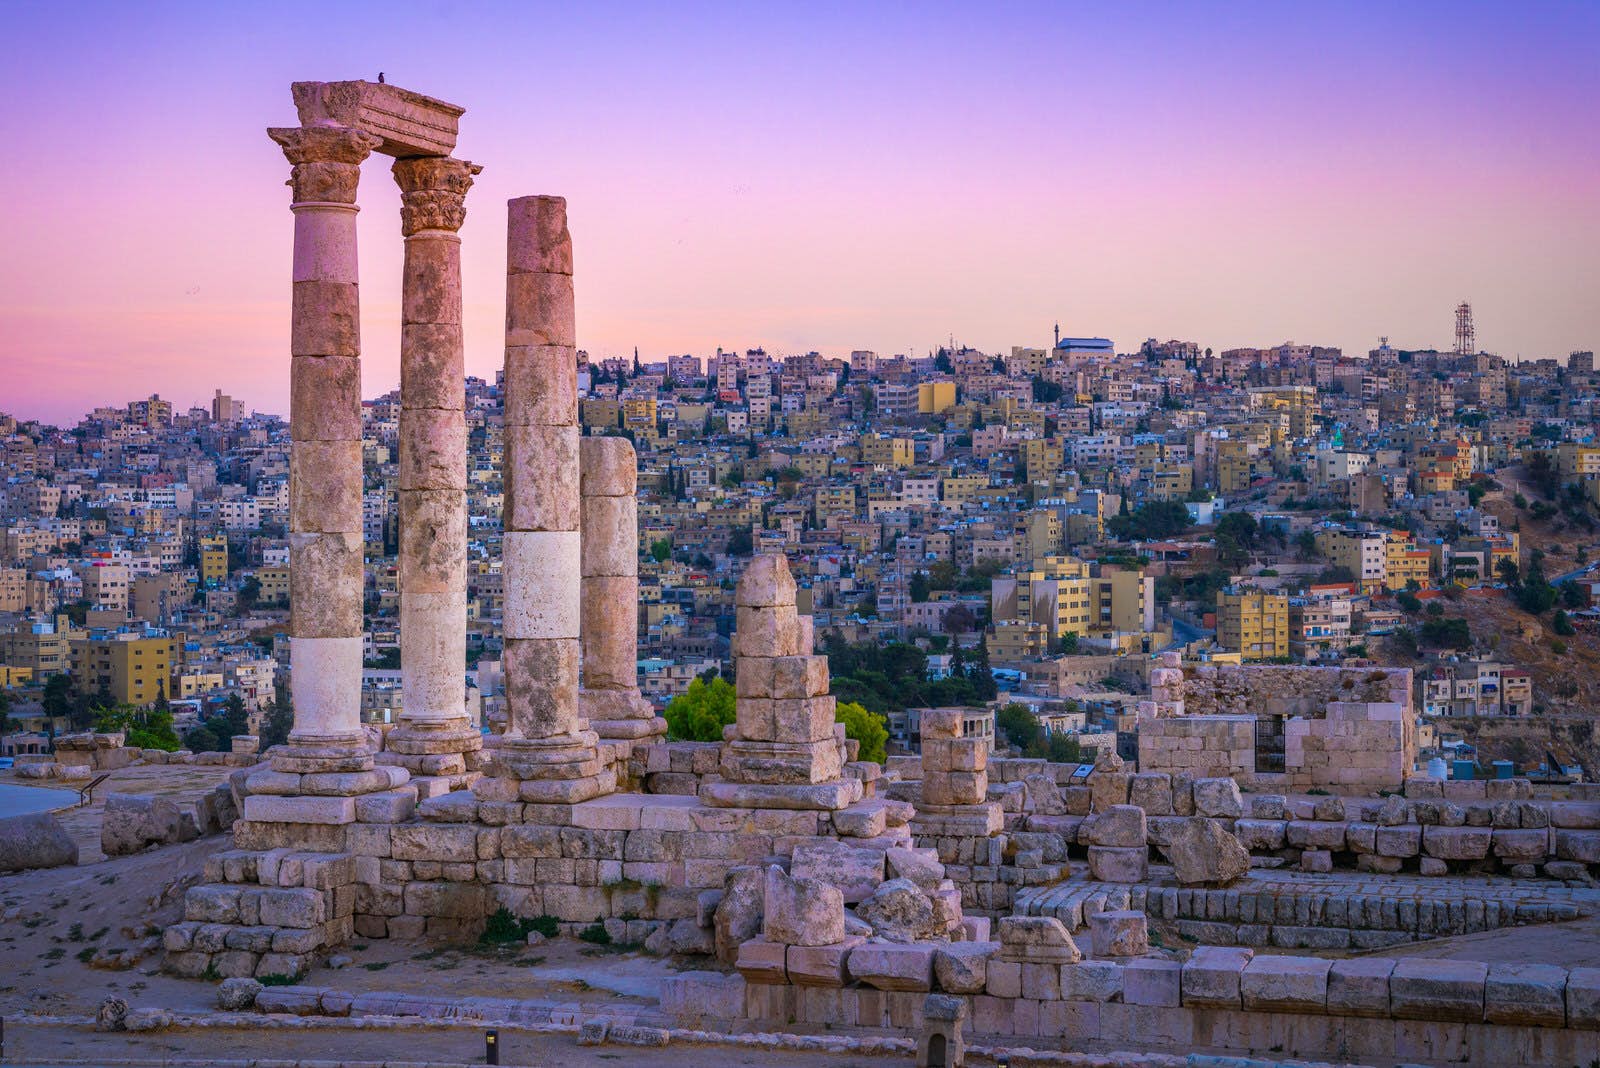 AmmanTour Packages - Book honeymoon ,family,adventure tour packages to Amman|Travel Knits